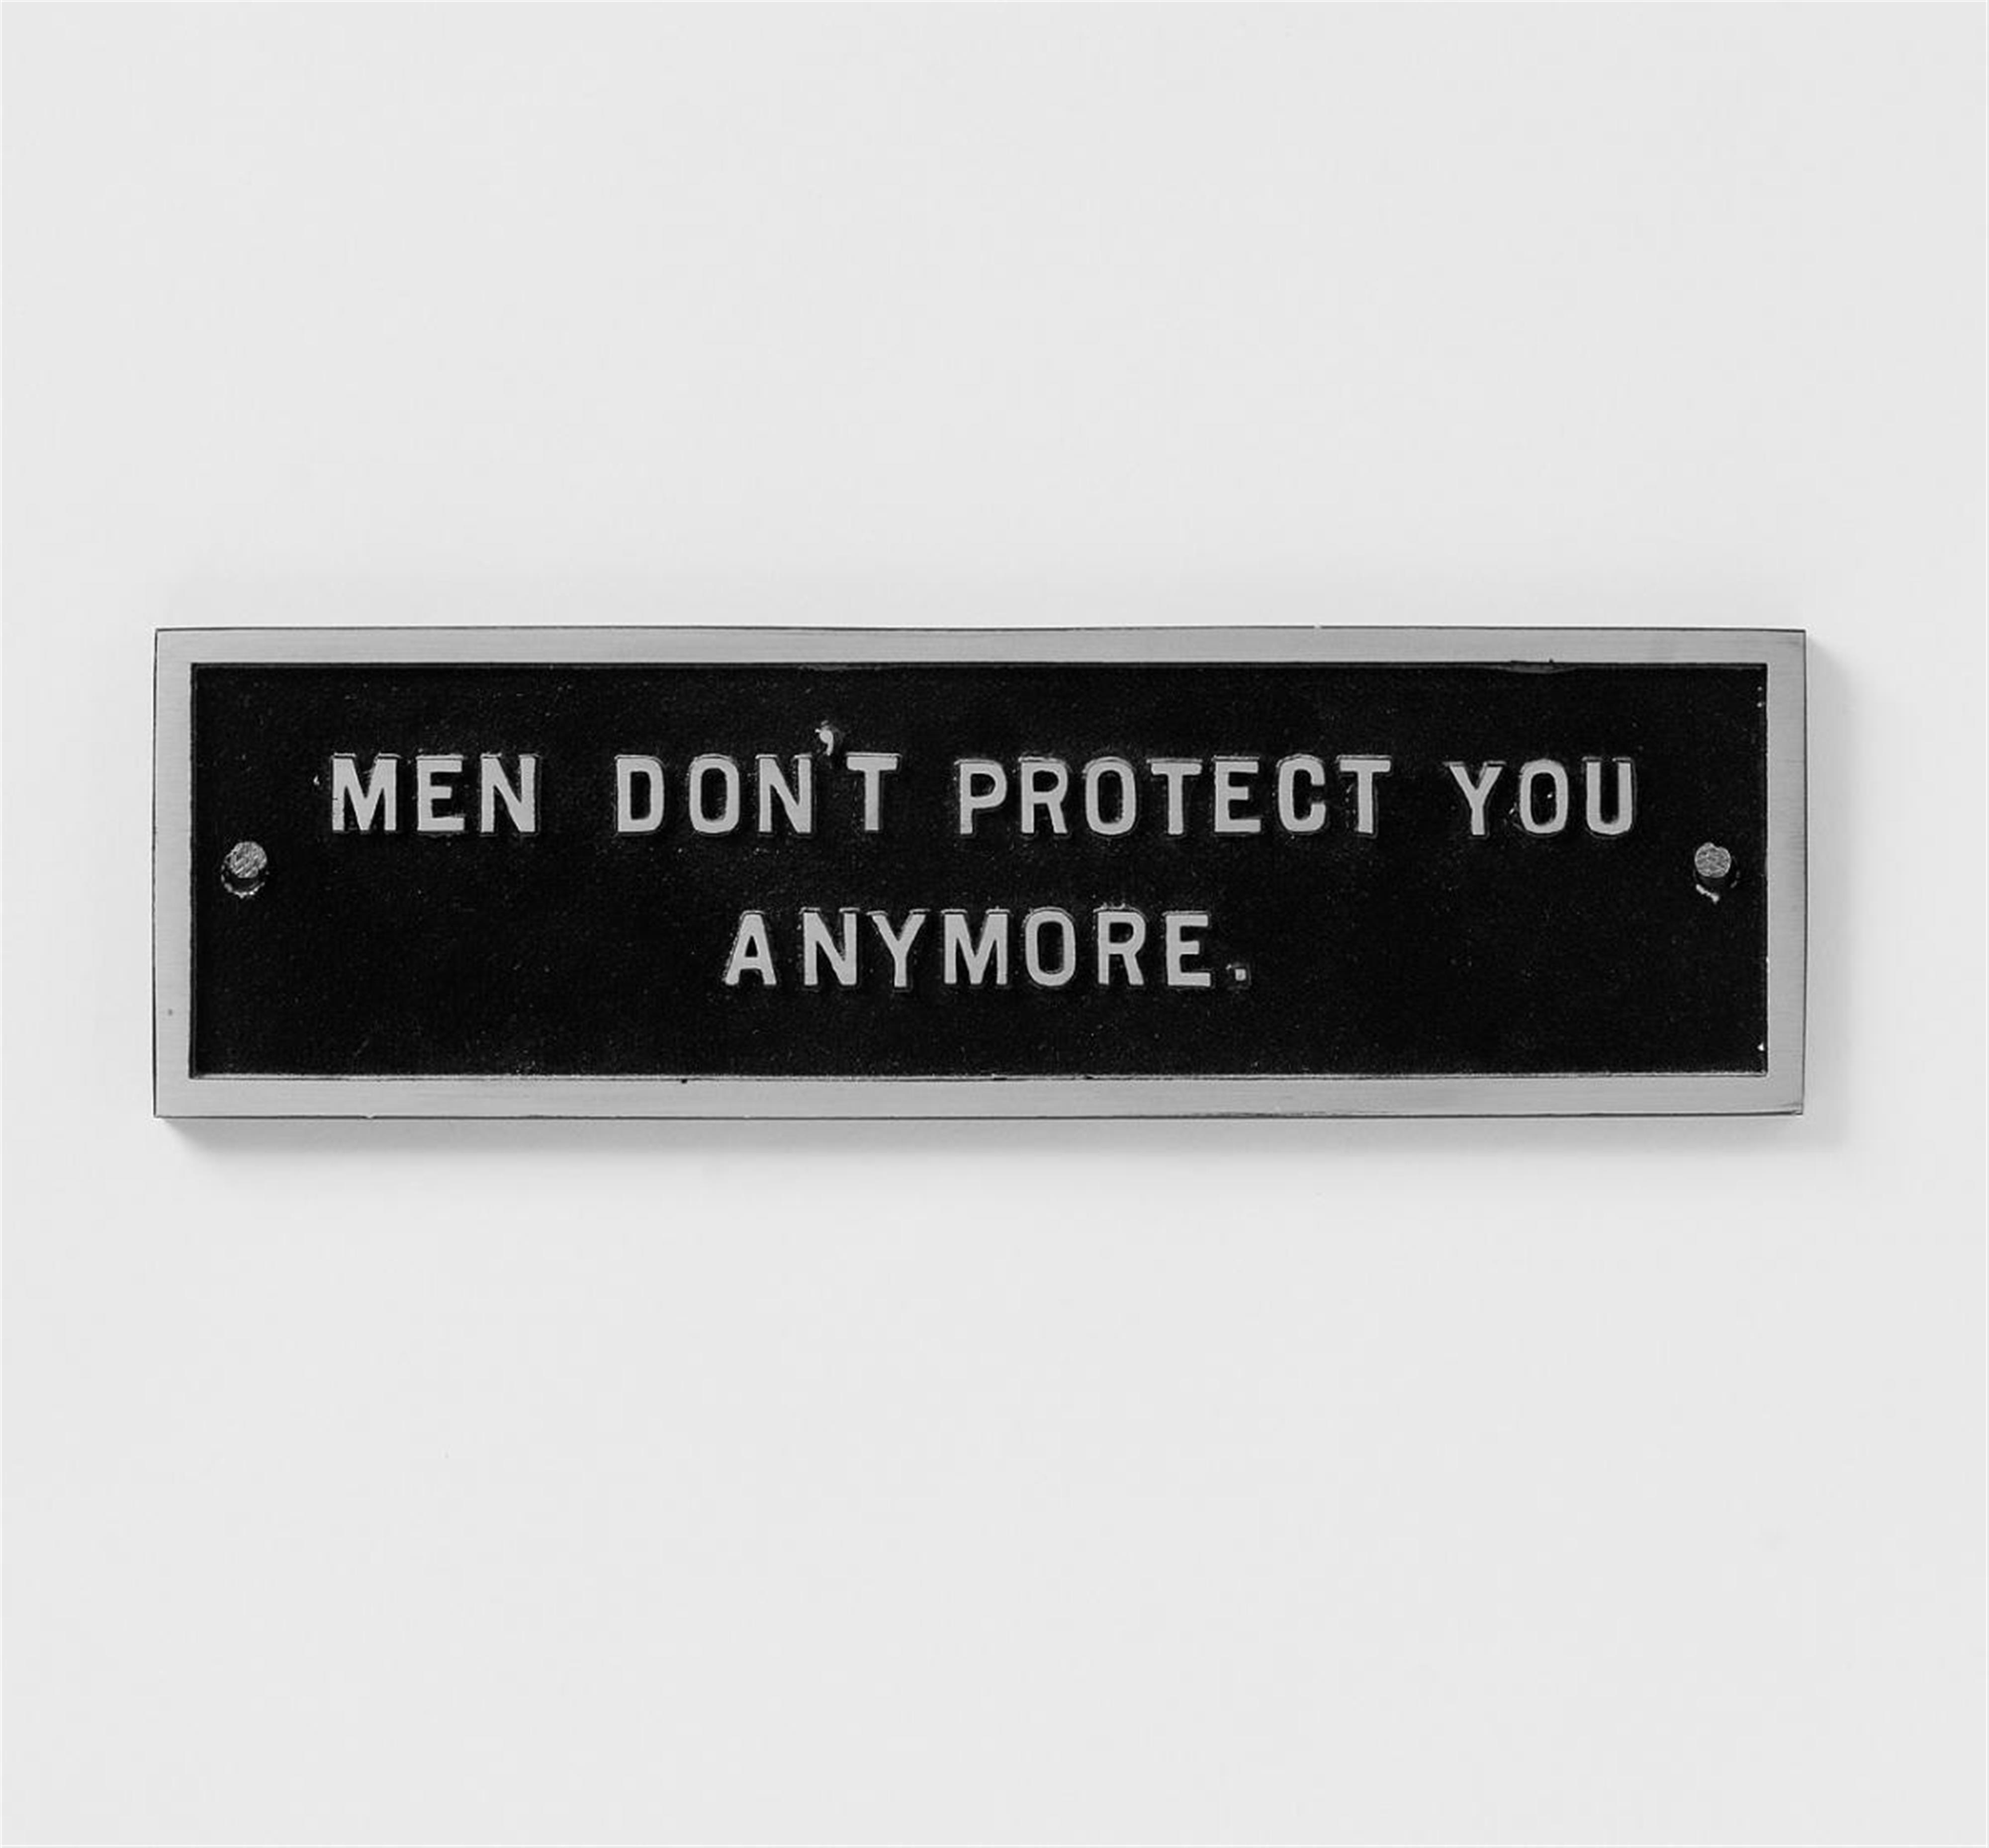 Jenny Holzer - From the Survival Series: Men don't protect you anymore - image-1